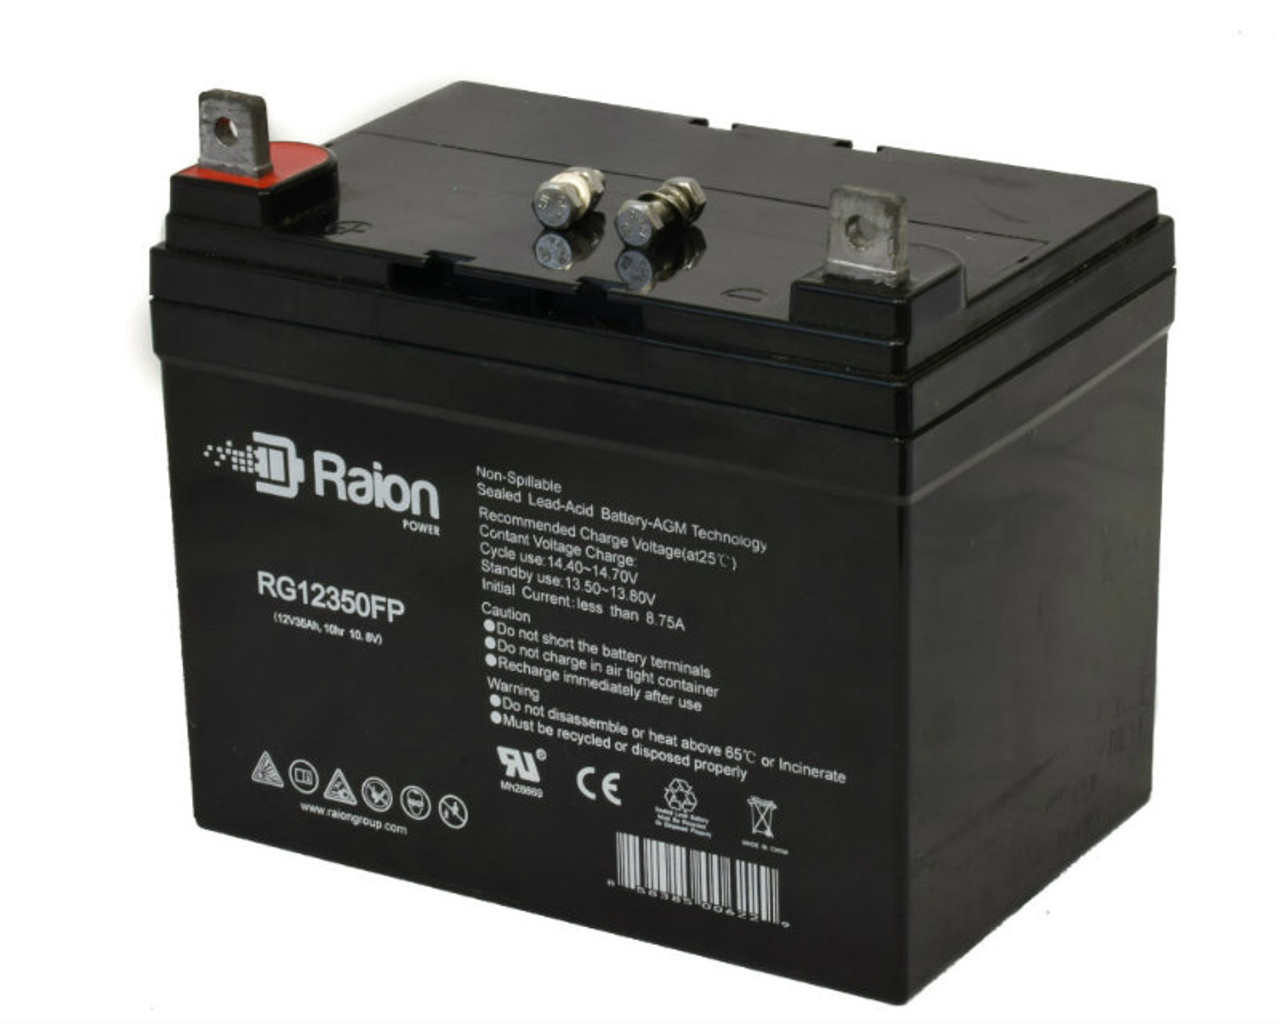 Raion Power Replacement 12V 35Ah RG12350FP Battery for Case International 107